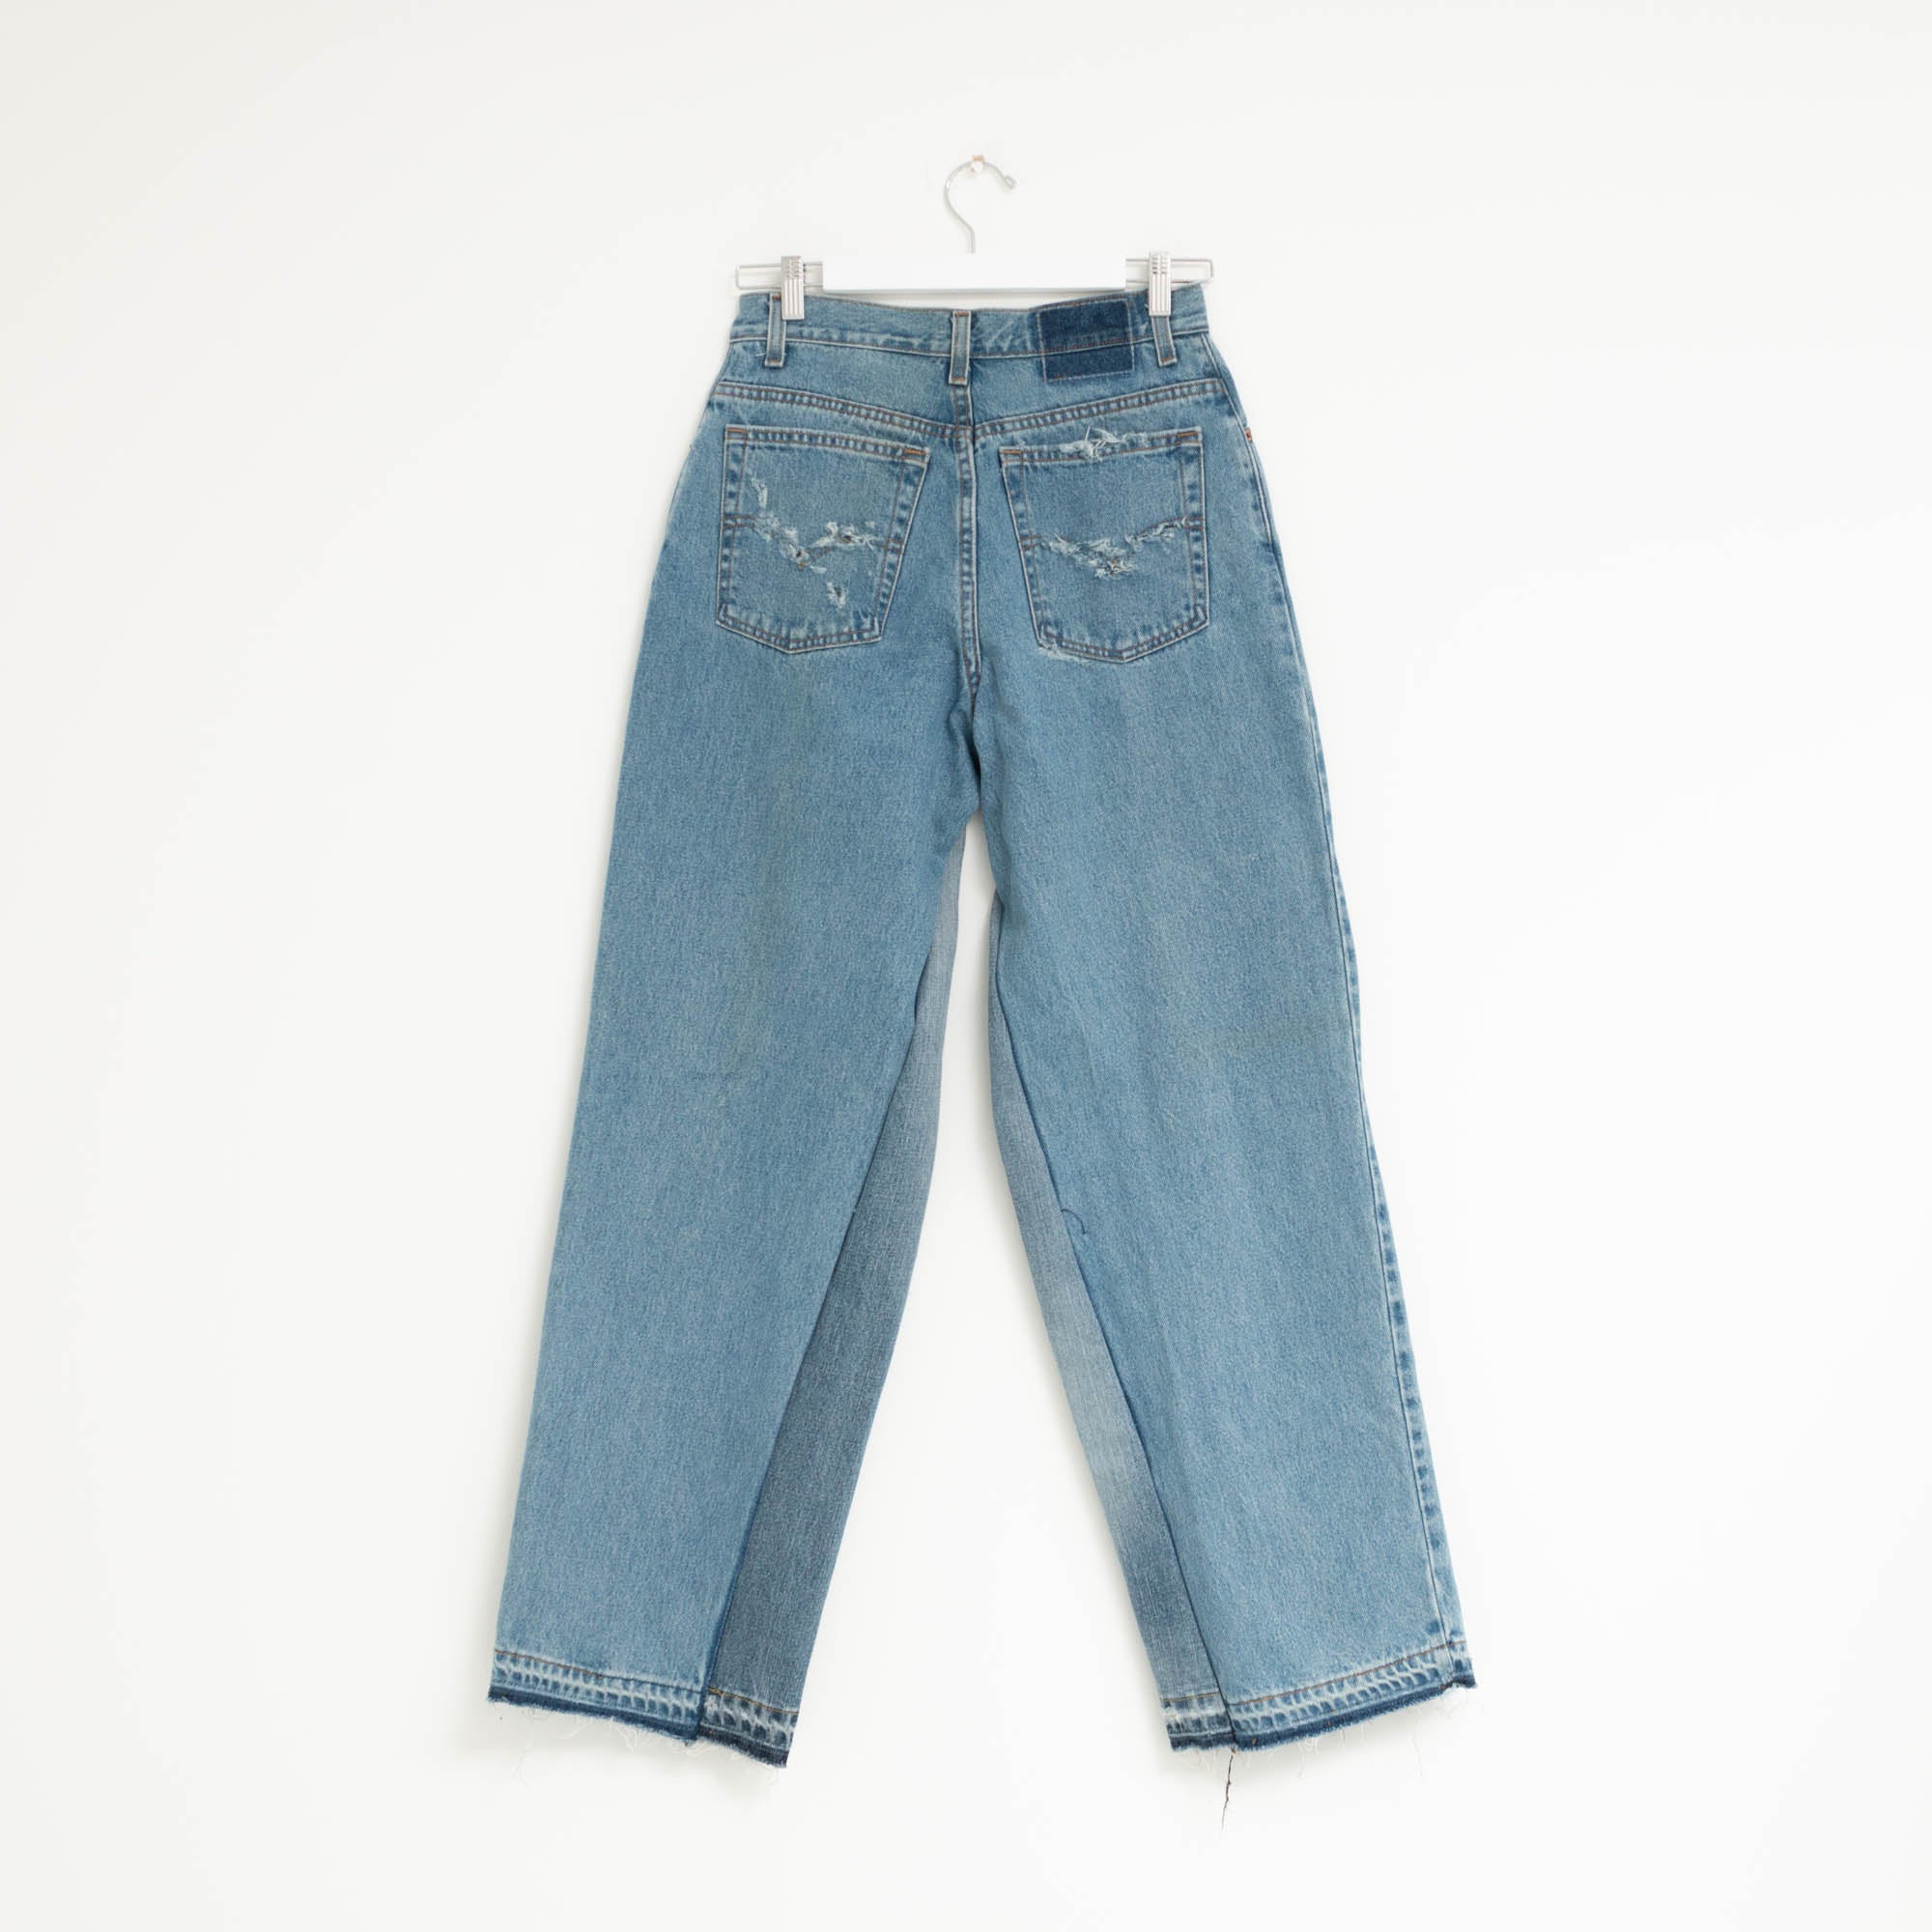 "FLARE" Jeans W30 L32